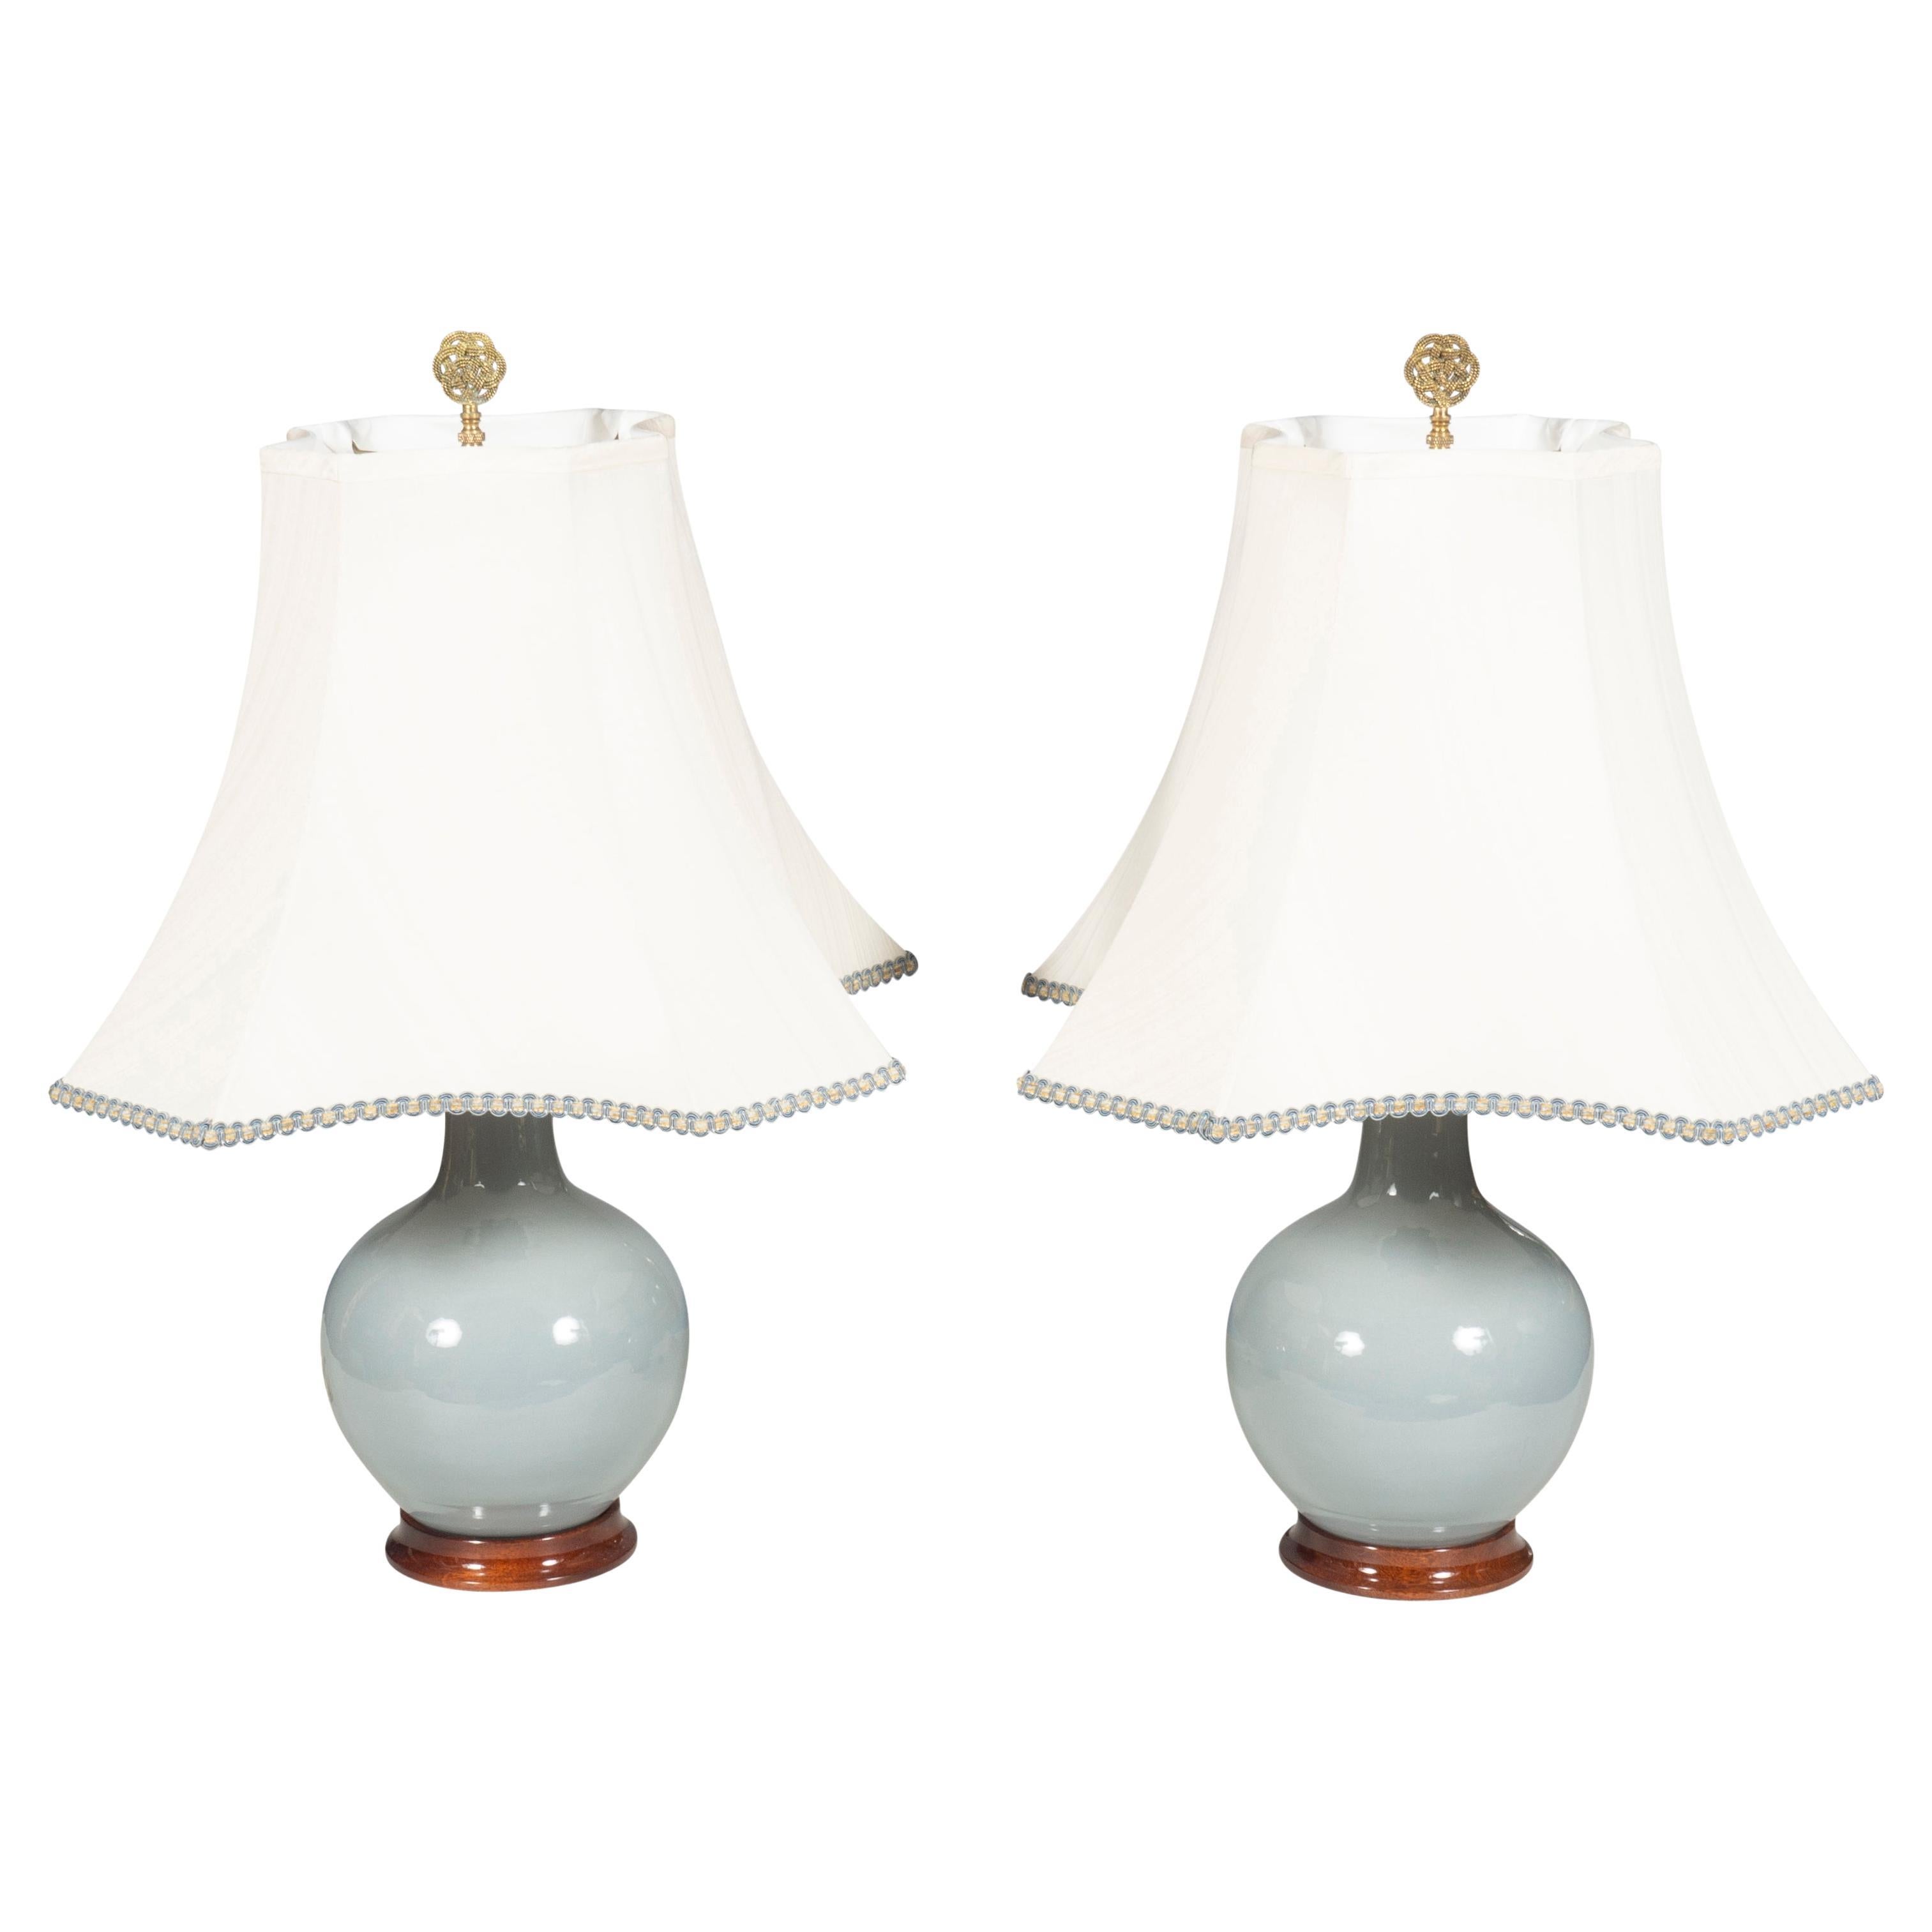 Pair of Christopher Spitzmiller Ceramic Table Lamps